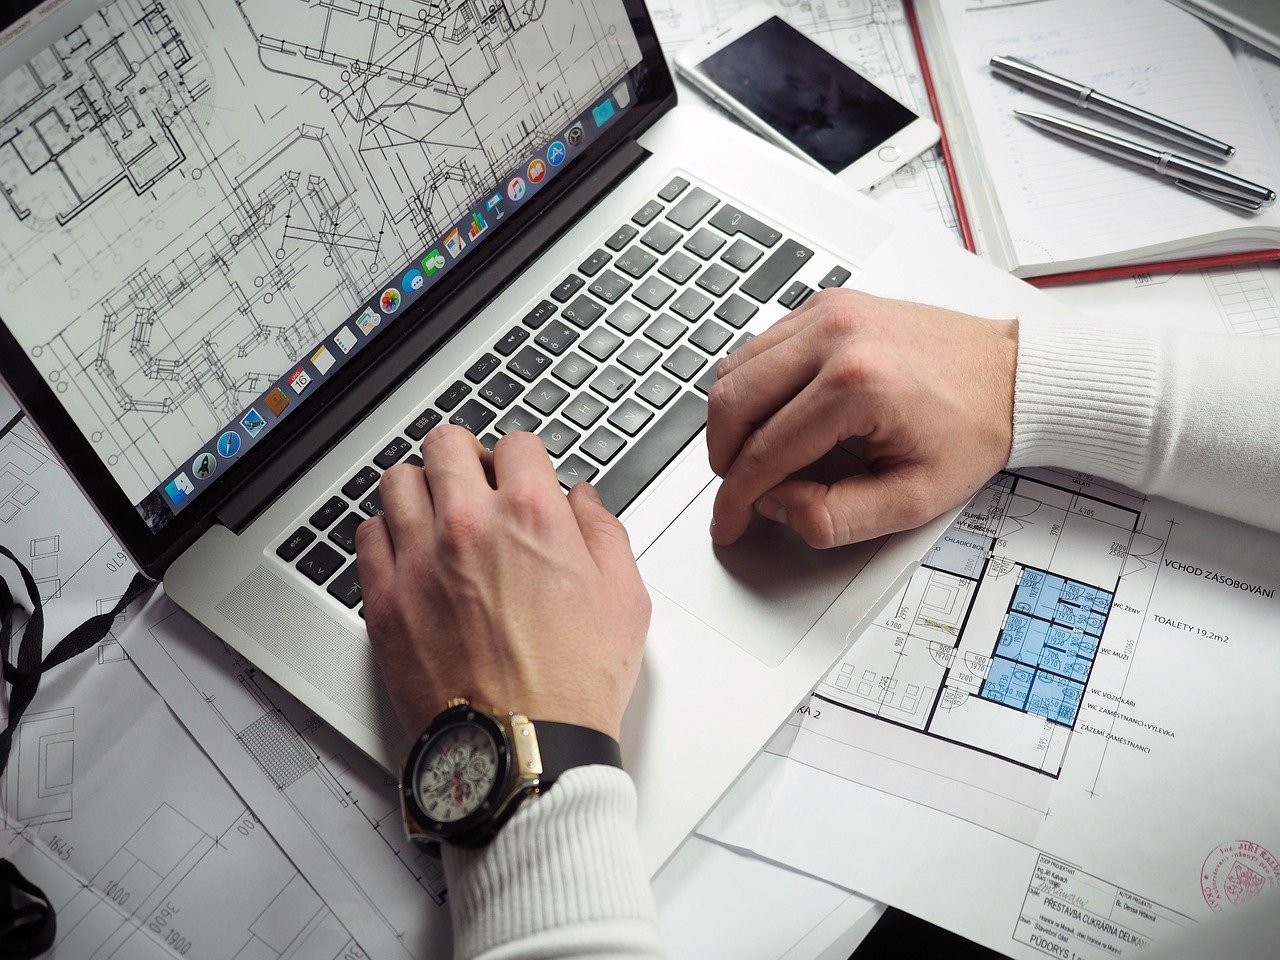 Man wearing cardigan works on architecture plans on laptop